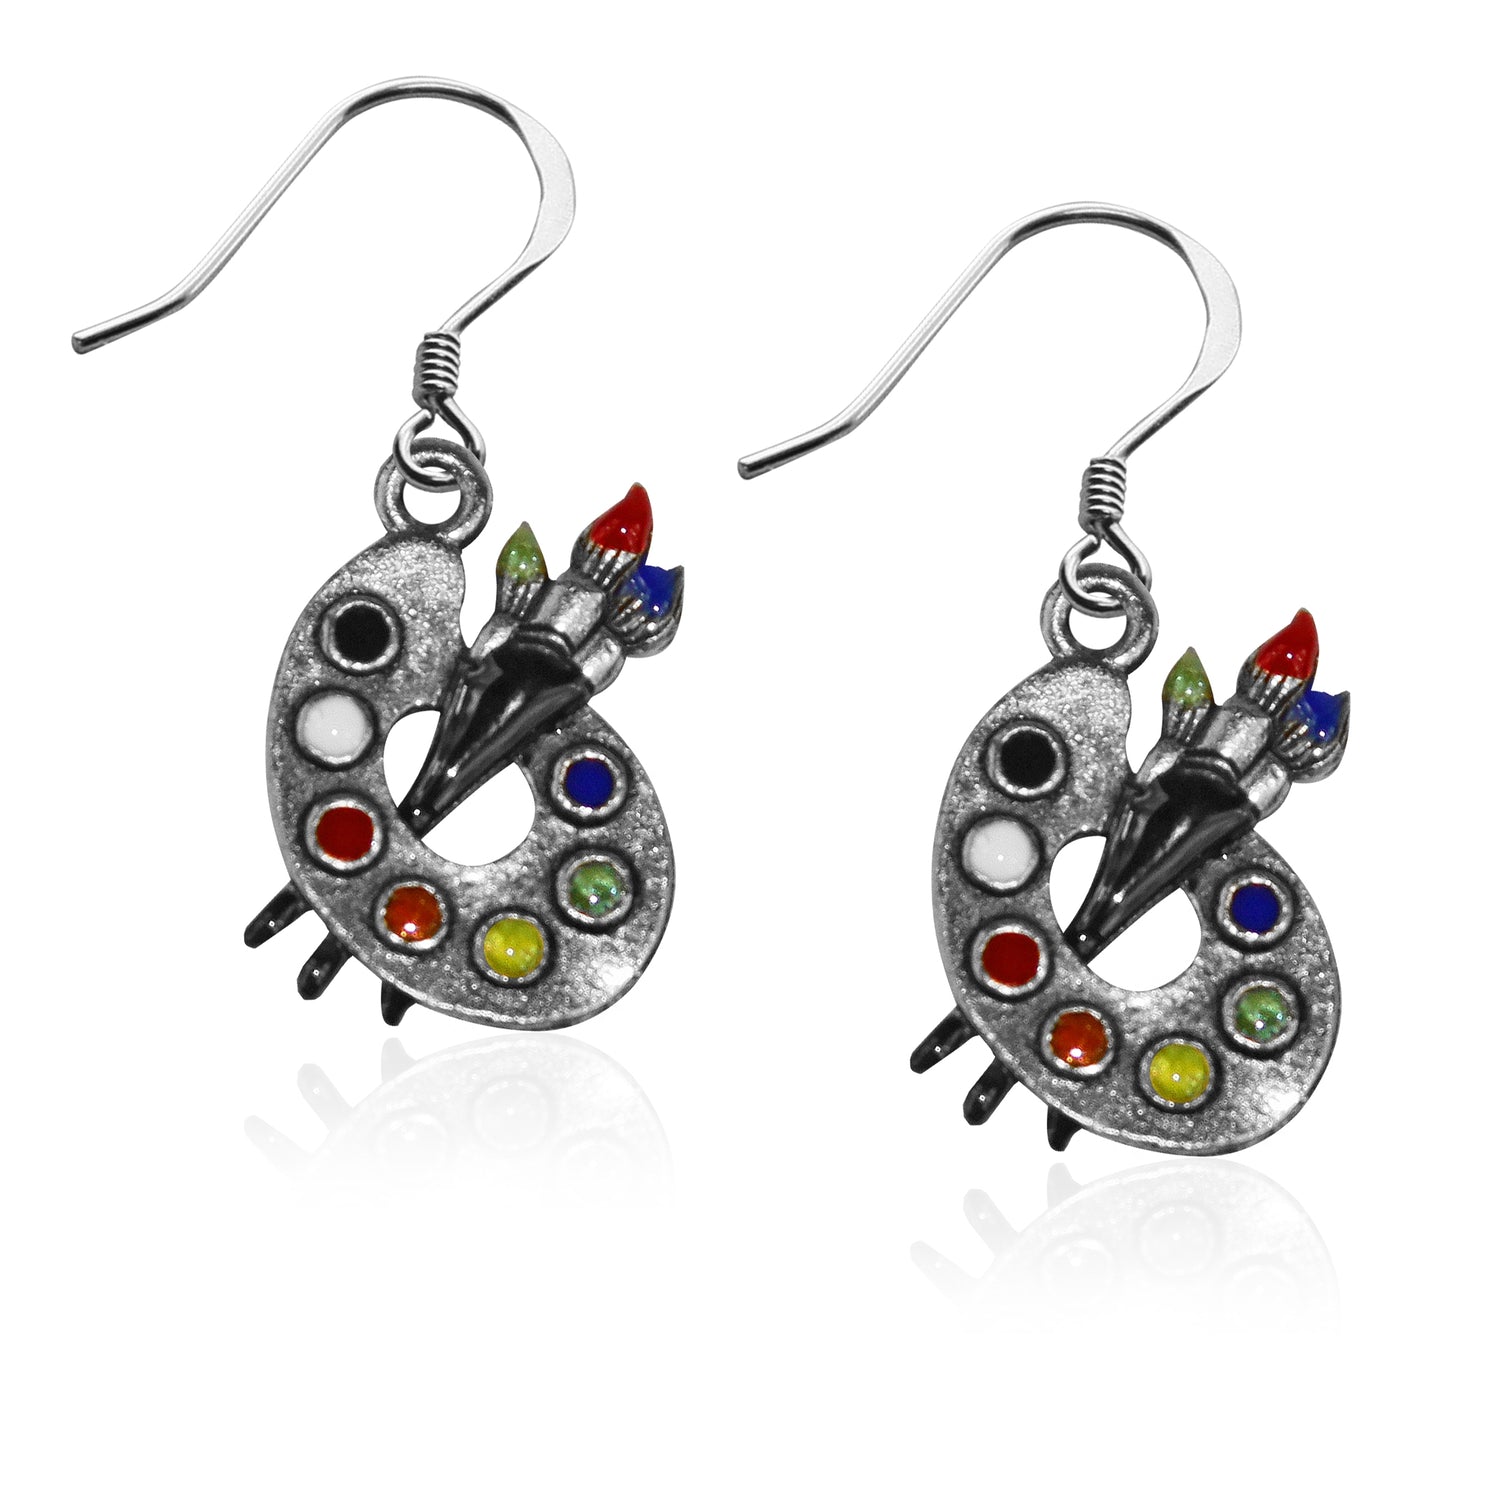 Whimsical Gifts | Artist Palette Charm Earrings in Silver Finish | Artist |  | Jewelry